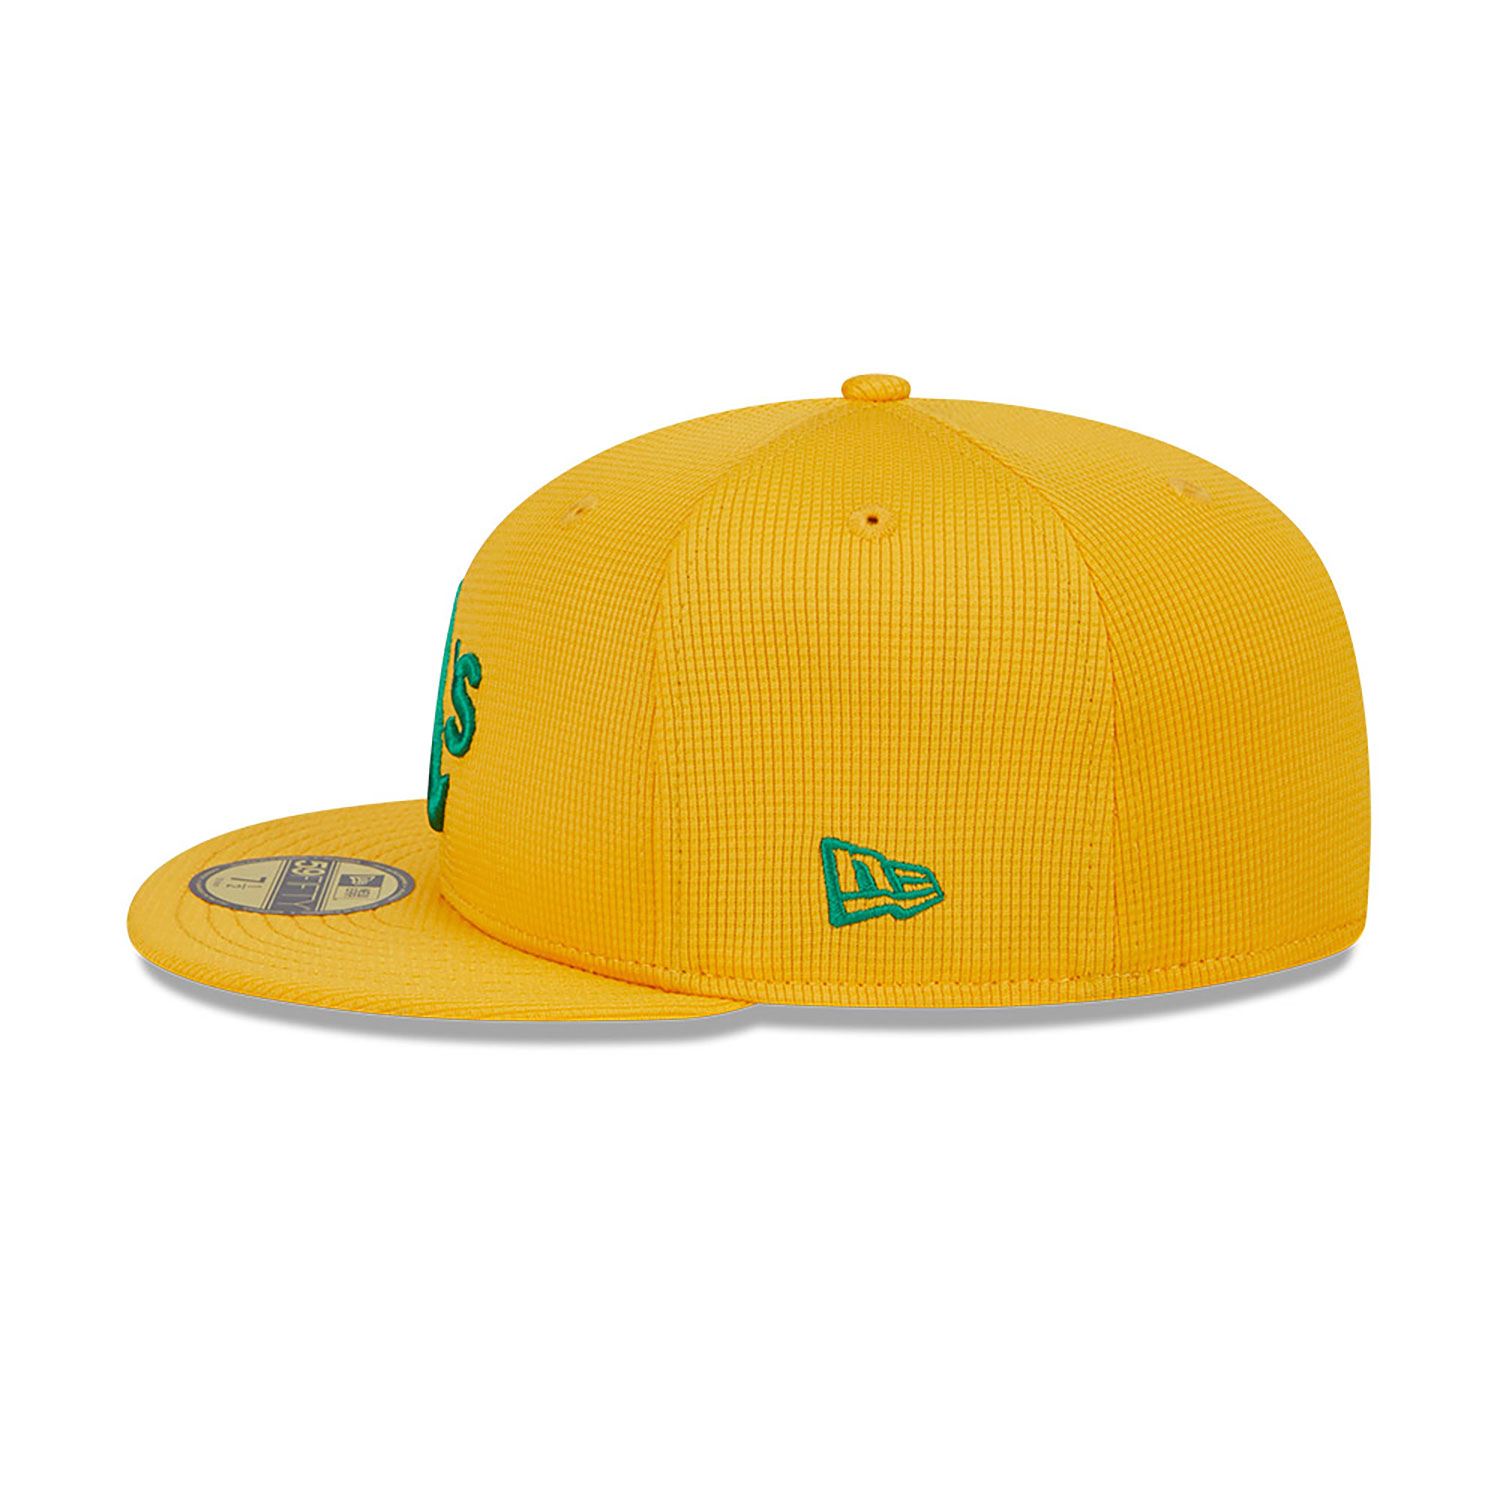 Oakland Athletics Spring Training Yellow 59FIFTY Fitted Cap